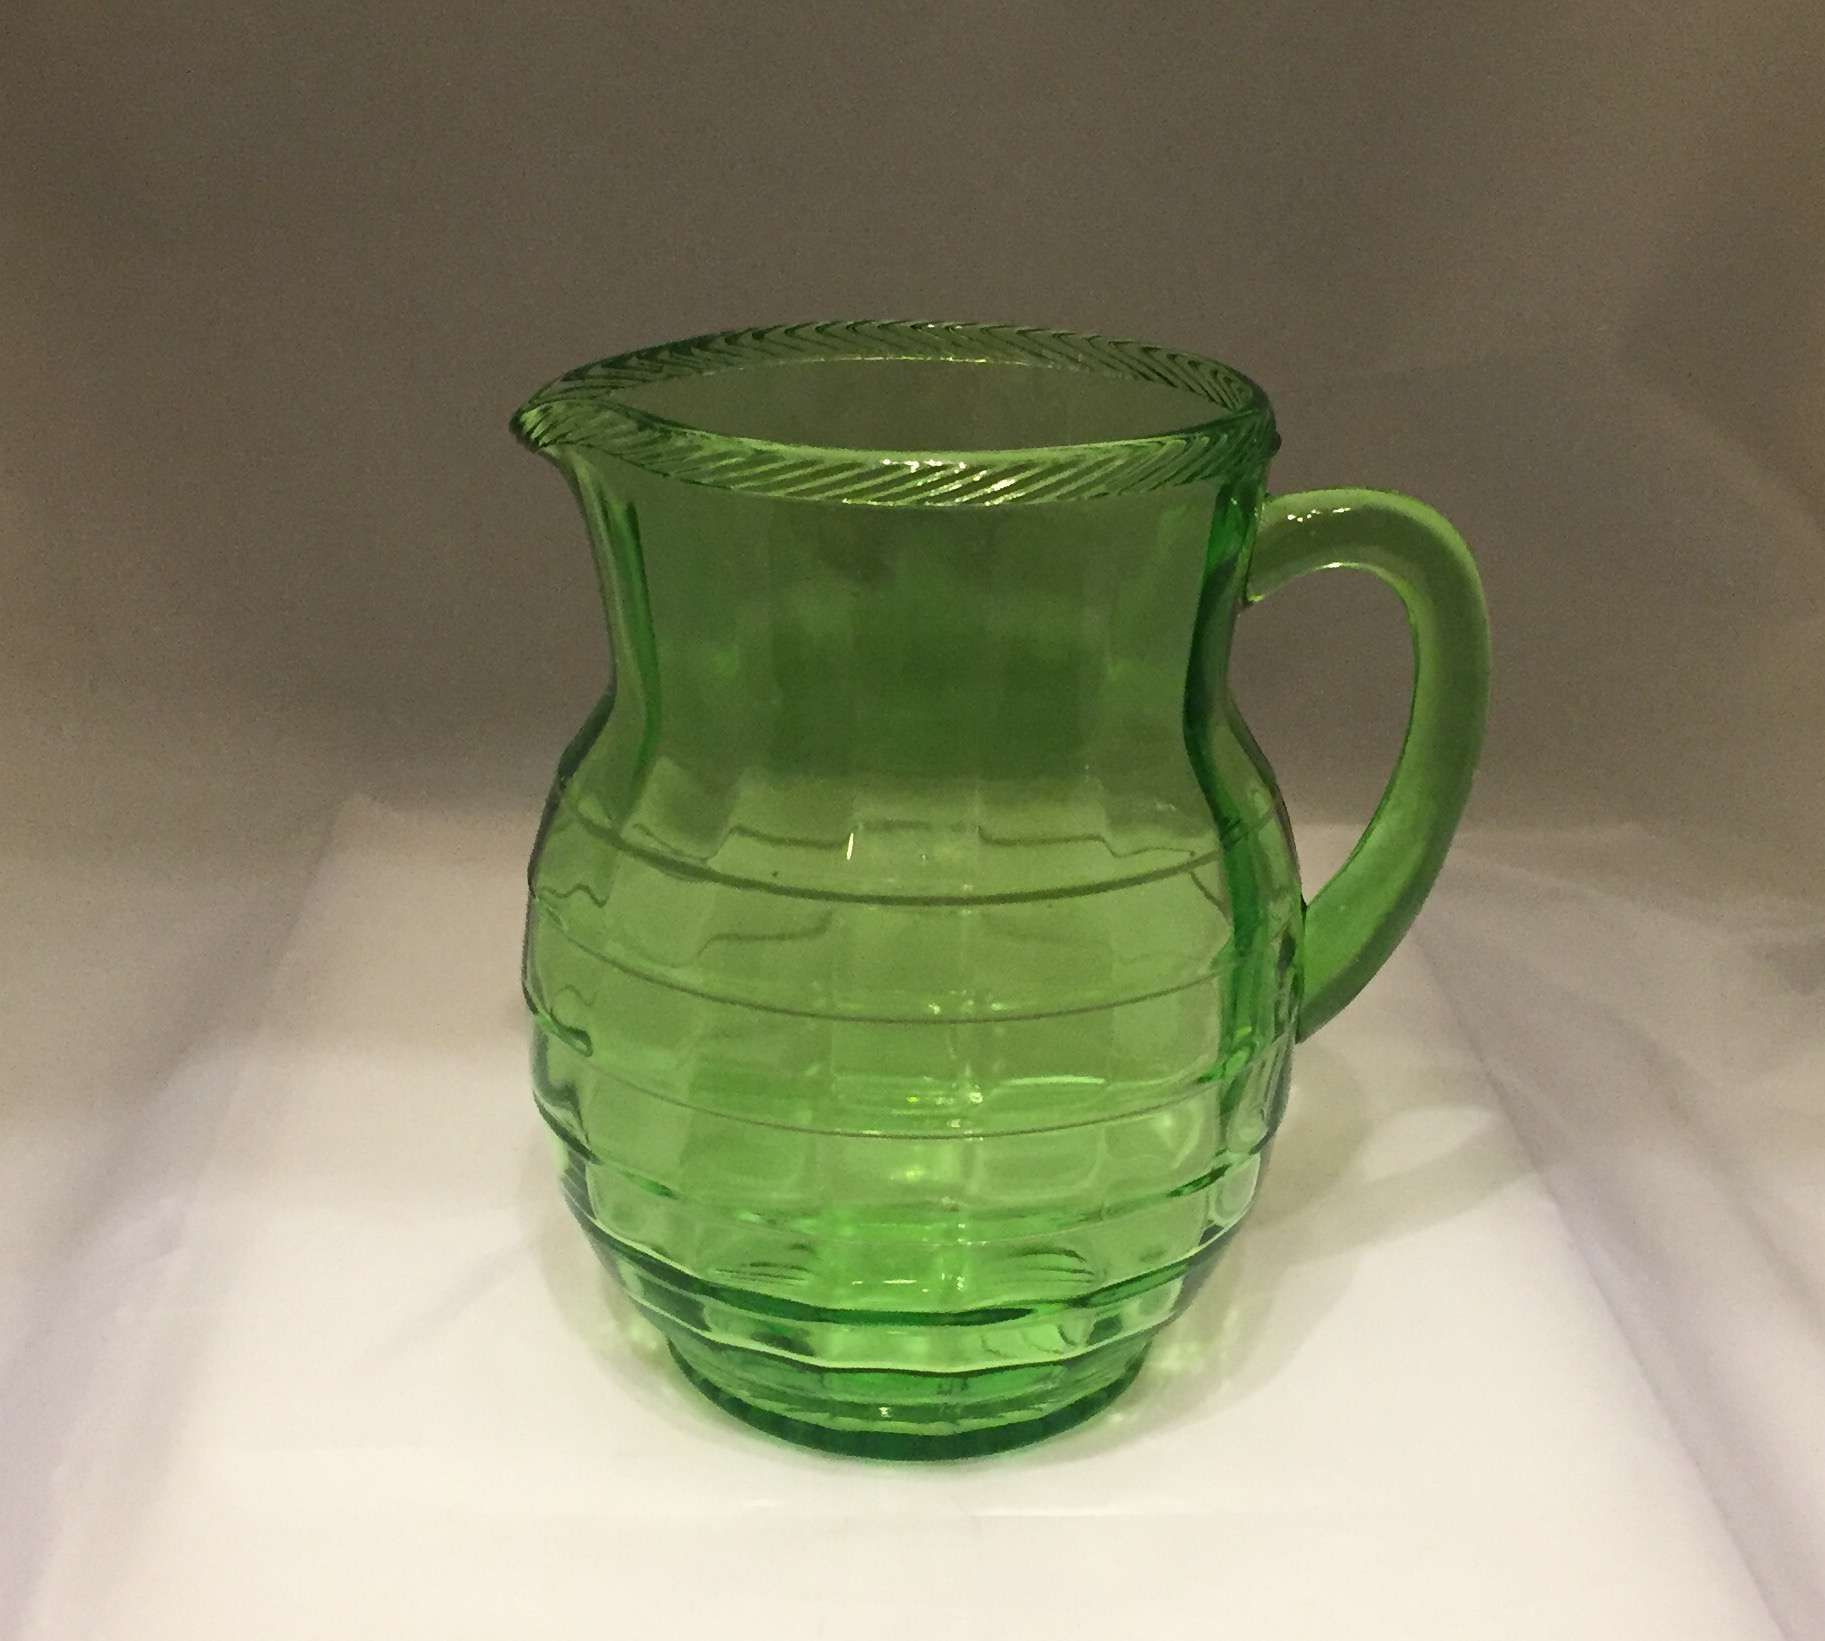 12 Best Viking Glass Green Vase 2024 free download viking glass green vase of 22 hobnail glass vase the weekly world with regard to depression glass price guide and pattern identification